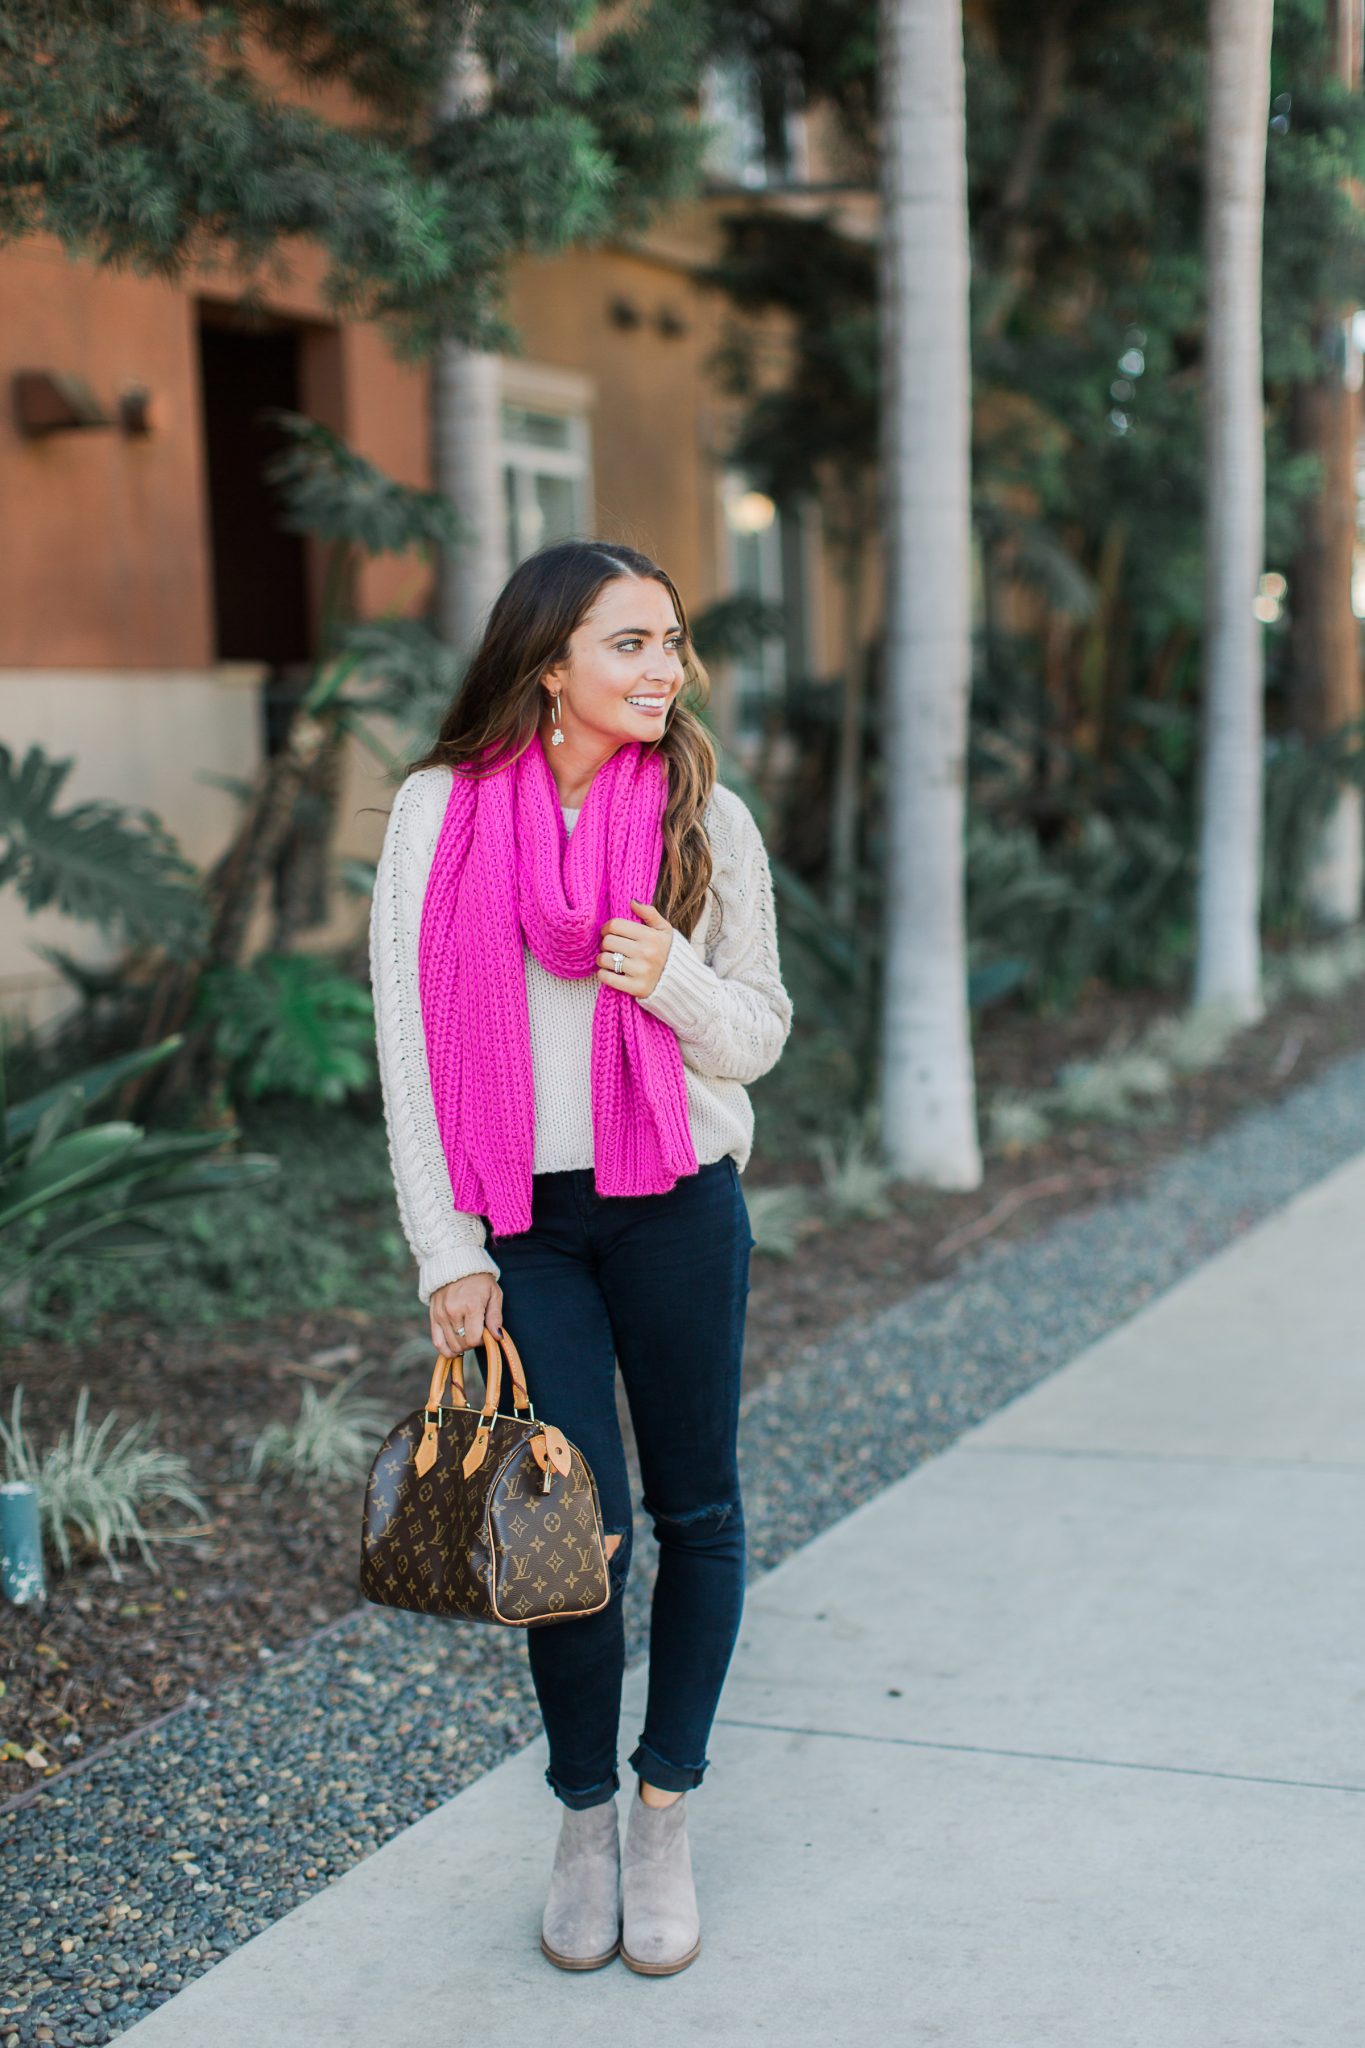 Hot Pink Scarf, Tan Sweater, Louis Vuitton - ASOS Sale top picks featured by popular Orange County fashion blogger, Maxie Elle